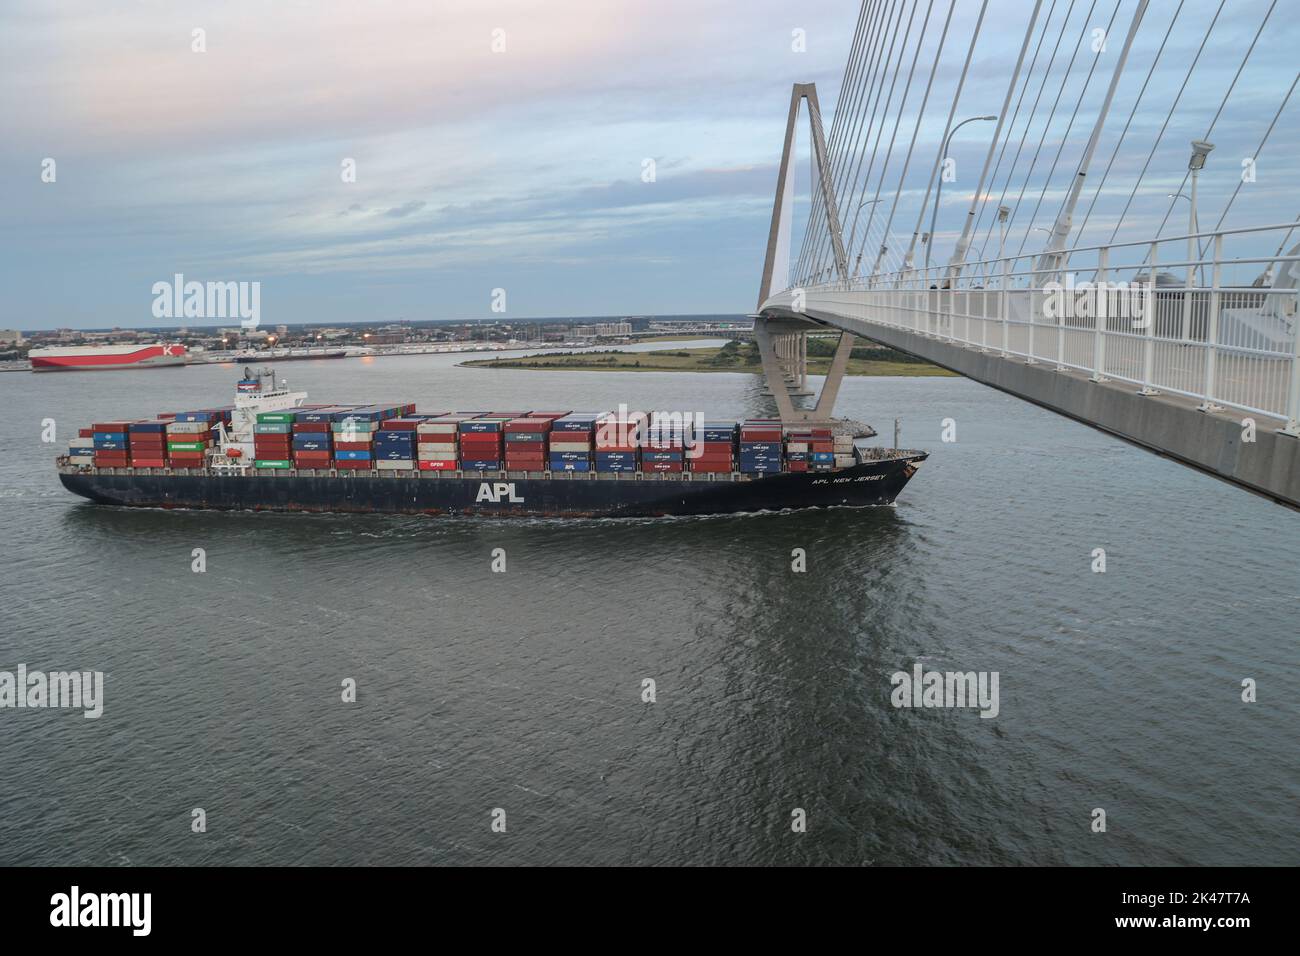 A container vessel travels under the Arthur Ravenel Jr. Bridge, which spans across the Cooper River in Charleston, S.C. The river is part of the Charleston Harbor Post 45 Deepening Project, which will make the Charleston Harbor deeper and wider to accommodate larger ships to call on the Port of Charleston. The project will make the channel the deepest on the East Coast of the United States at 52 feet. (U.S. Army photo by Patrick Bloodgood) Stock Photo